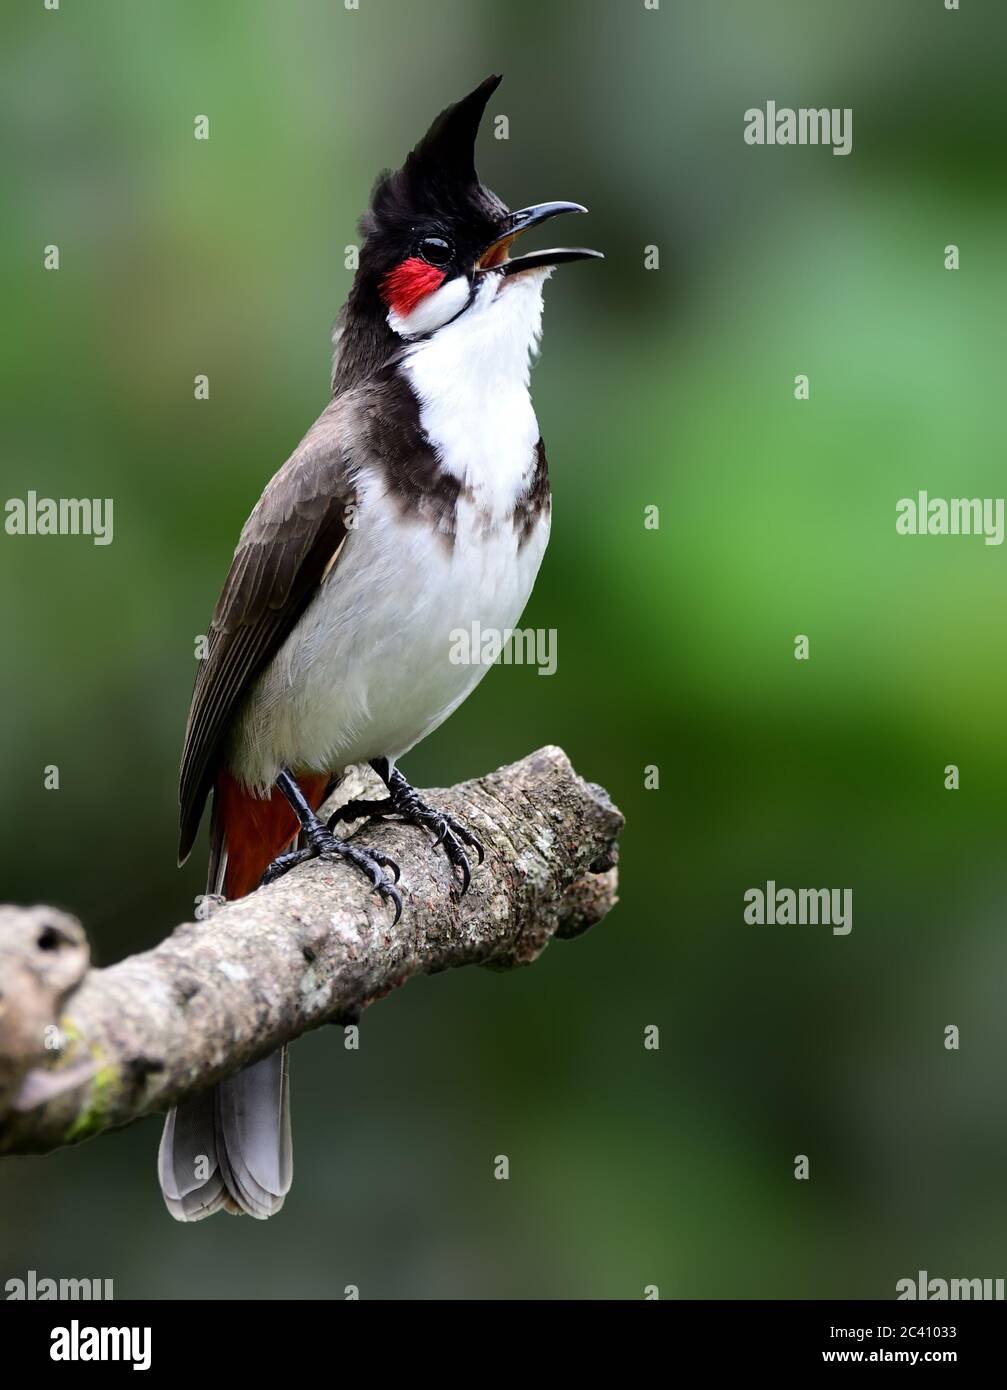 The red-whiskered bulbul, or crested bulbul, is a passerine bird ...